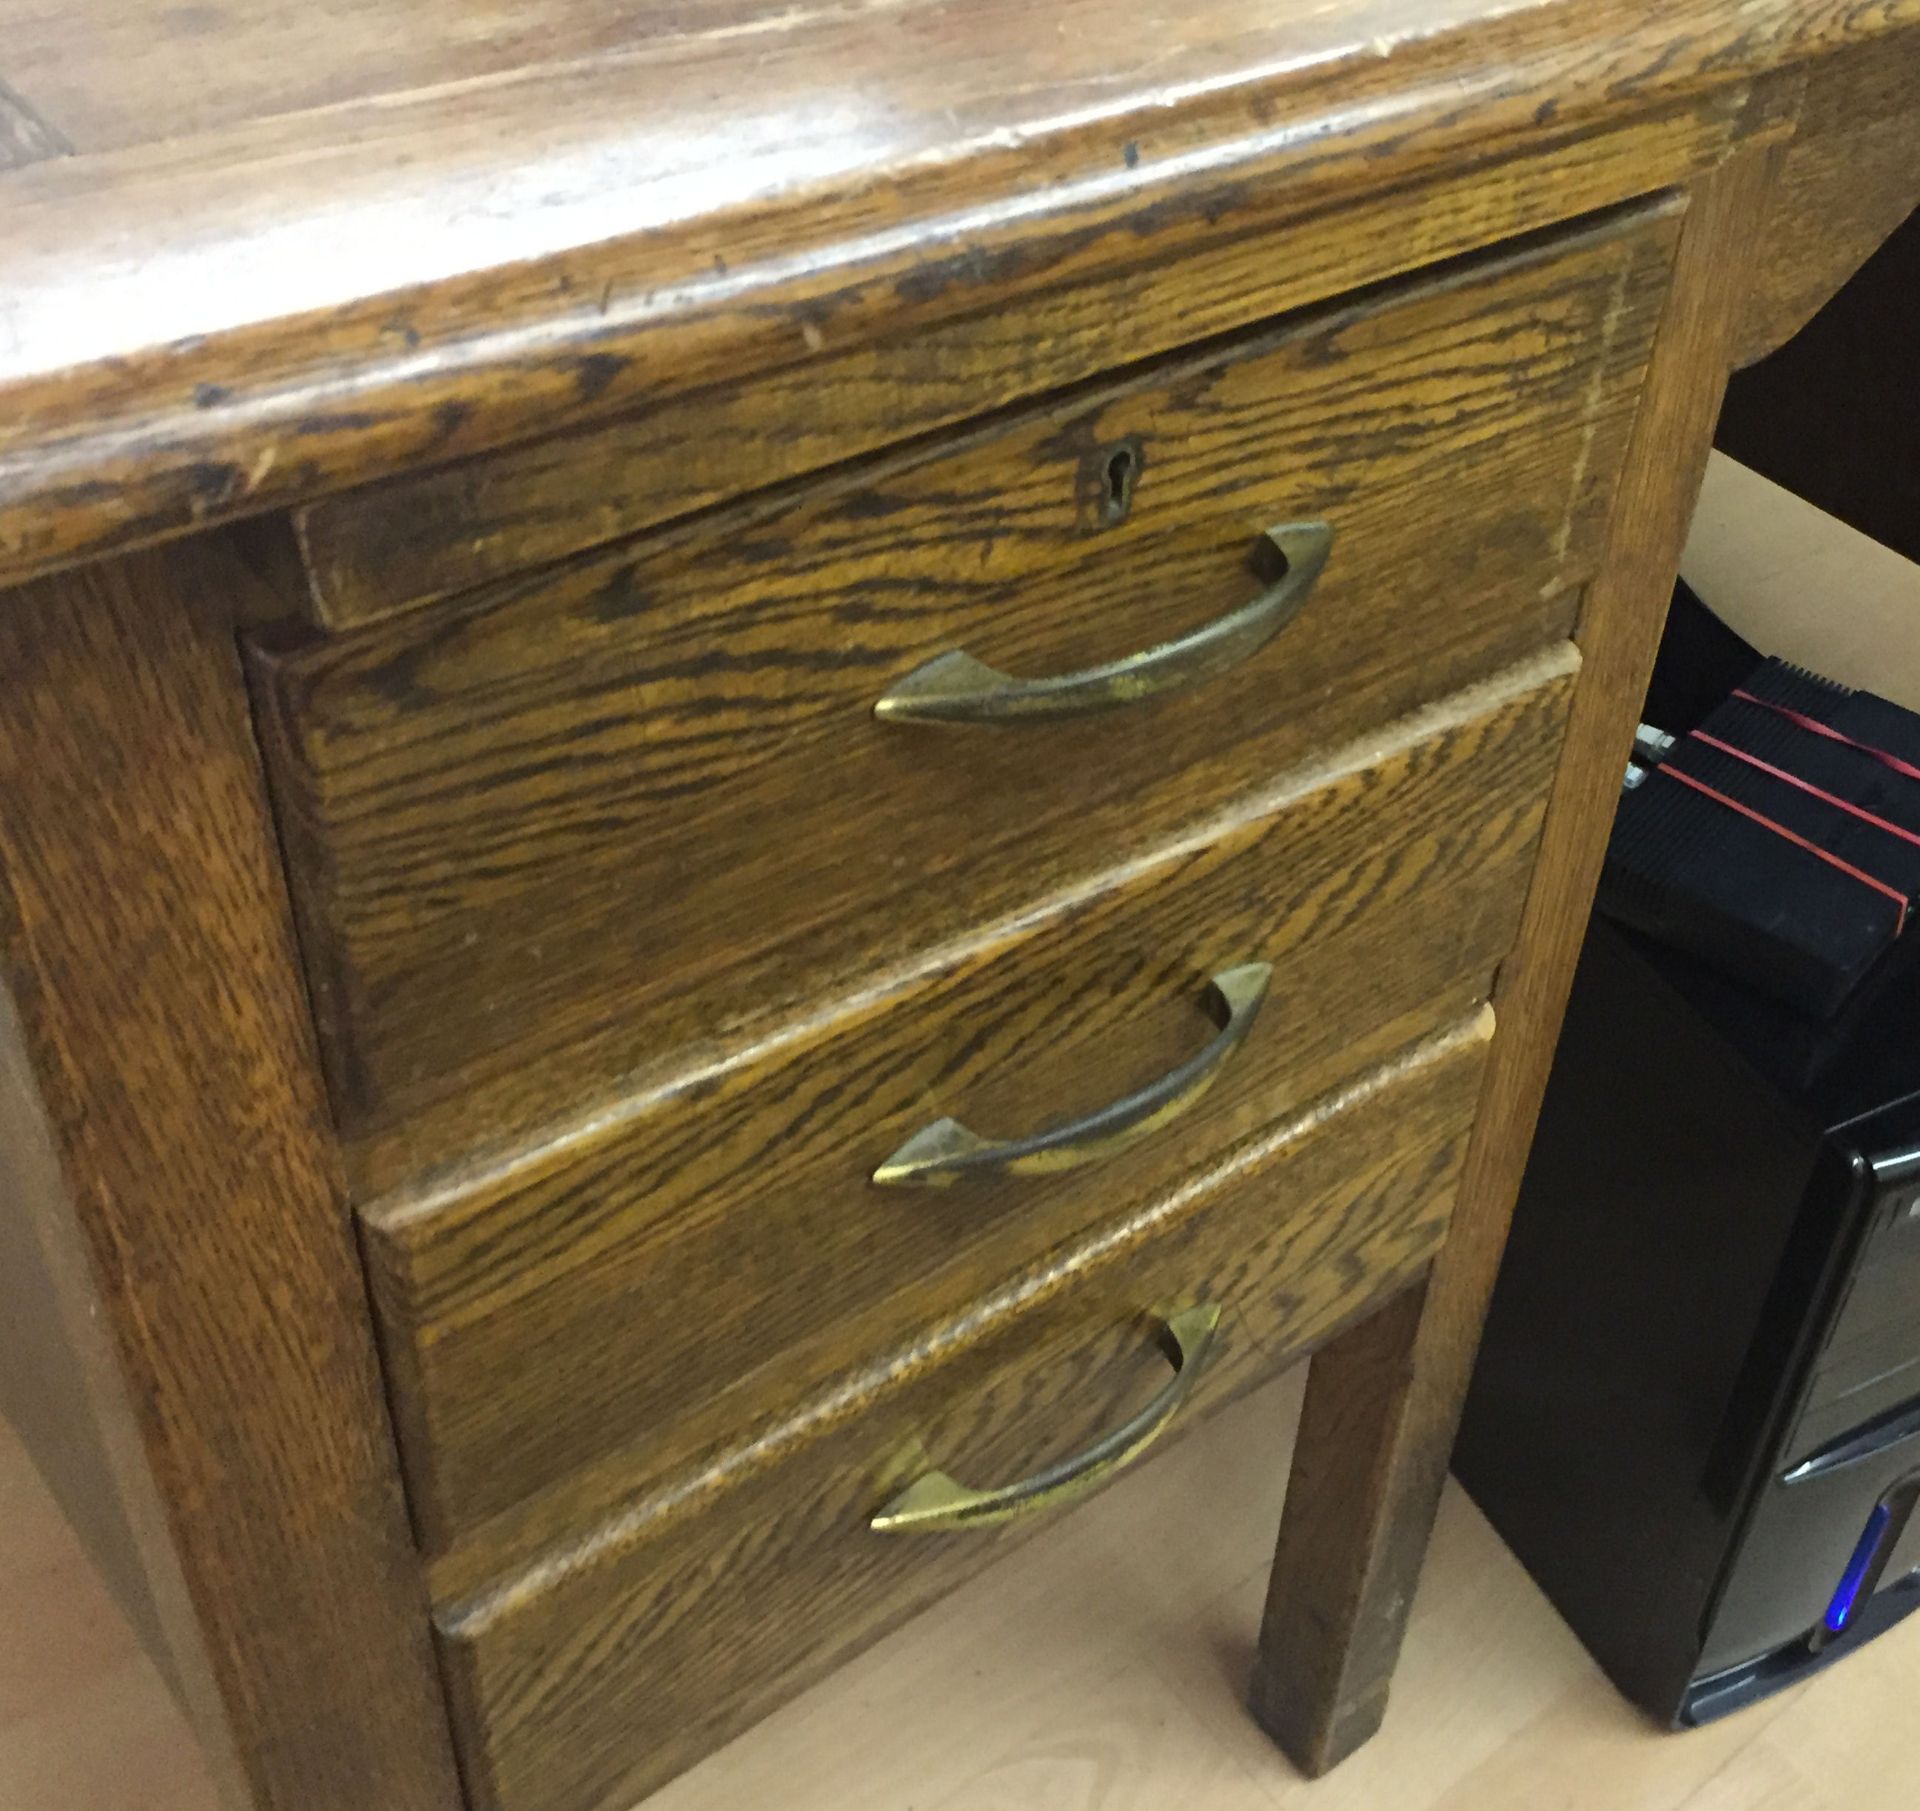 1 x Attractive Writing Desk - CL171 - Location: London, N4 - Image 3 of 8